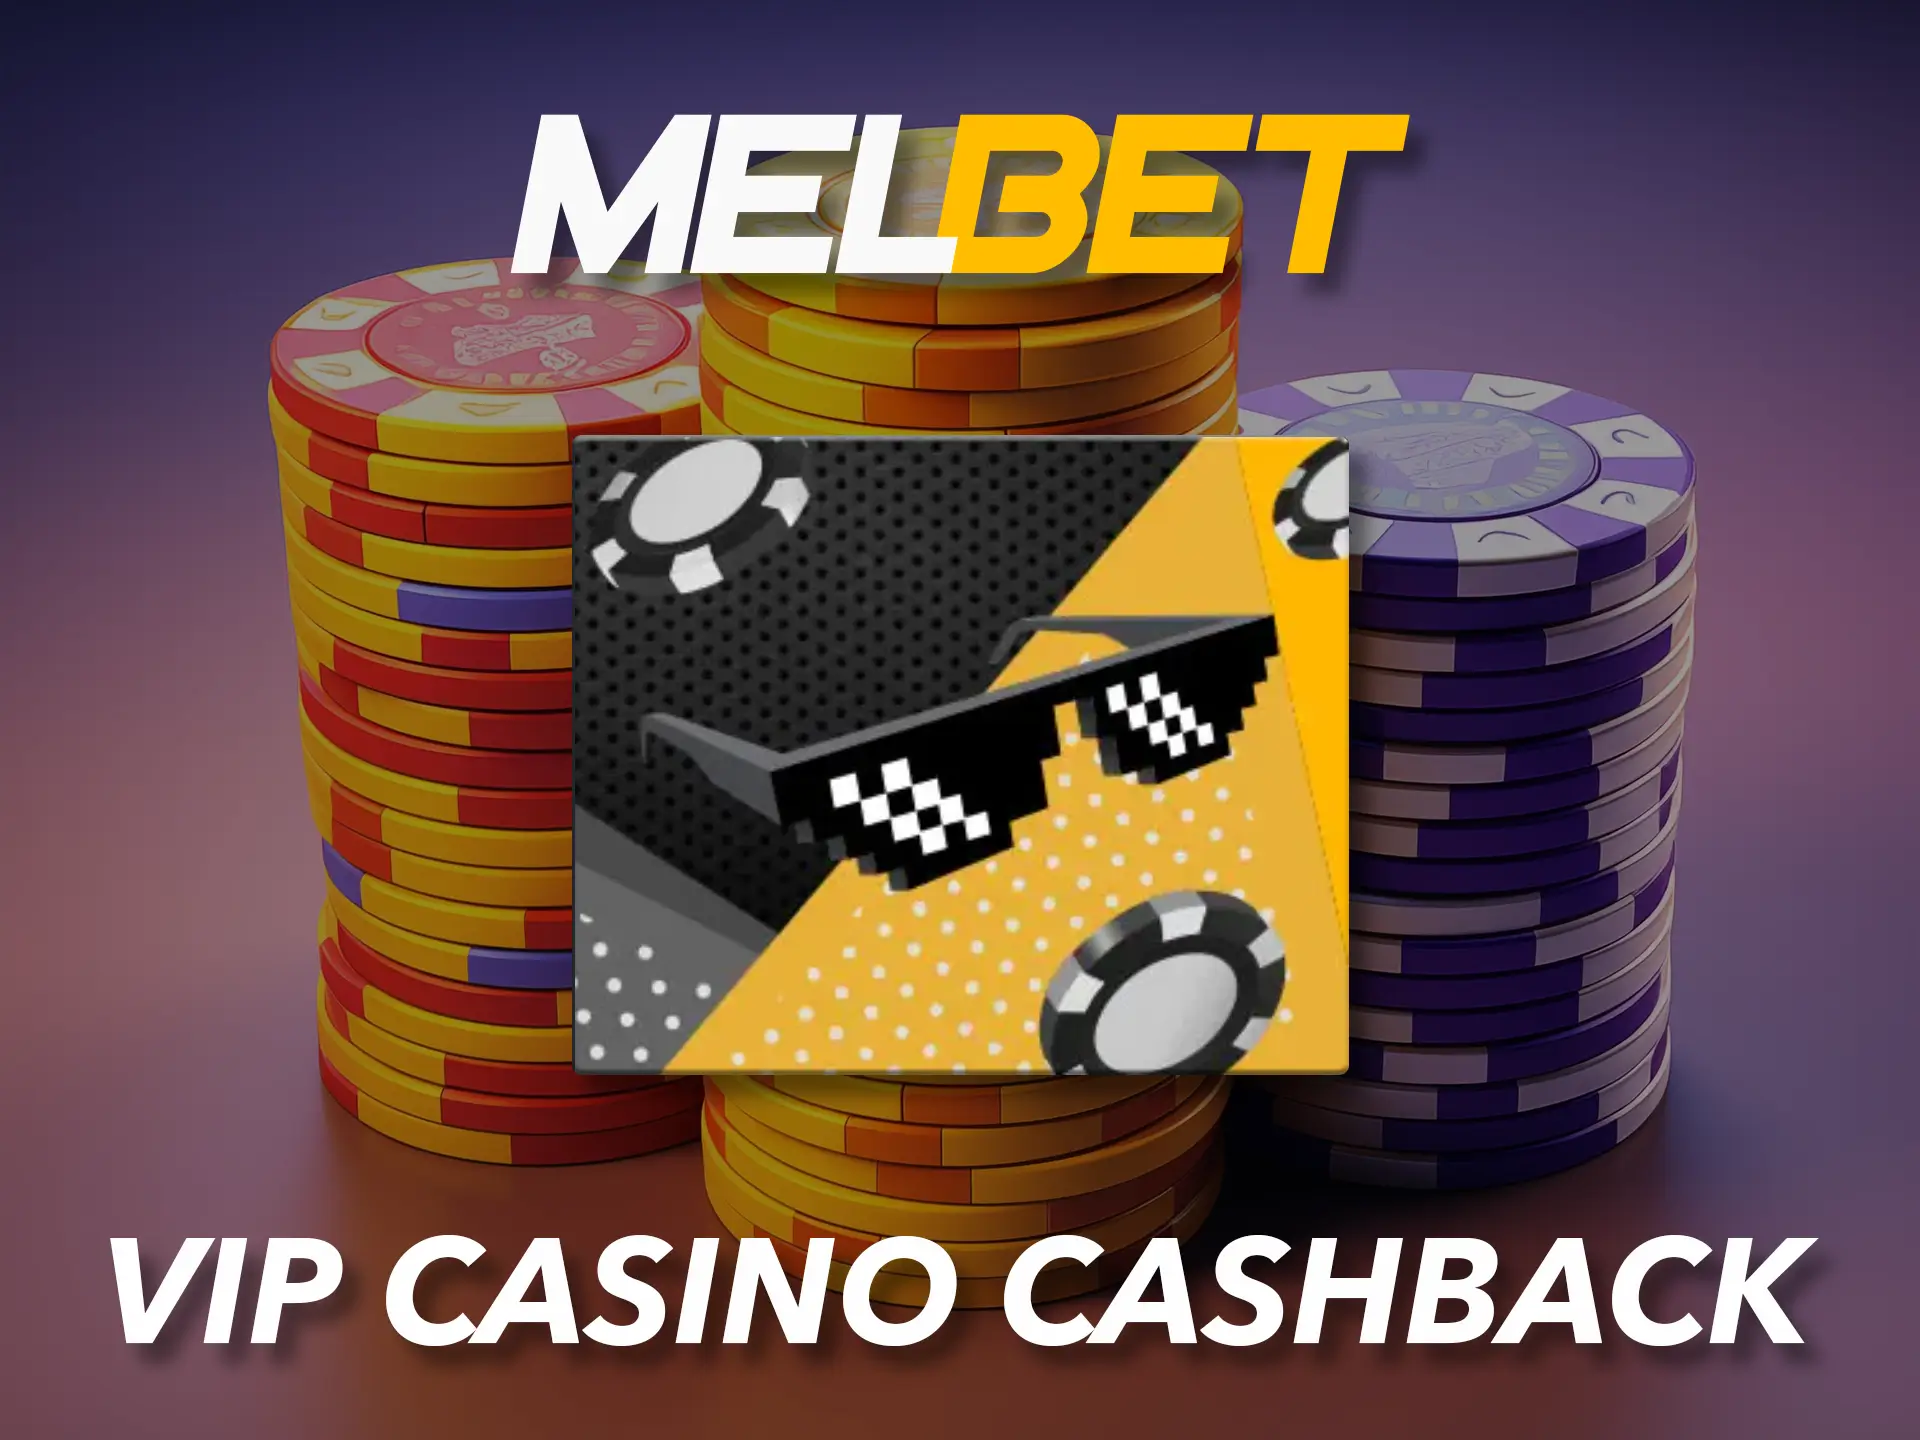 Upgrade your account and take cashback from Melbet.